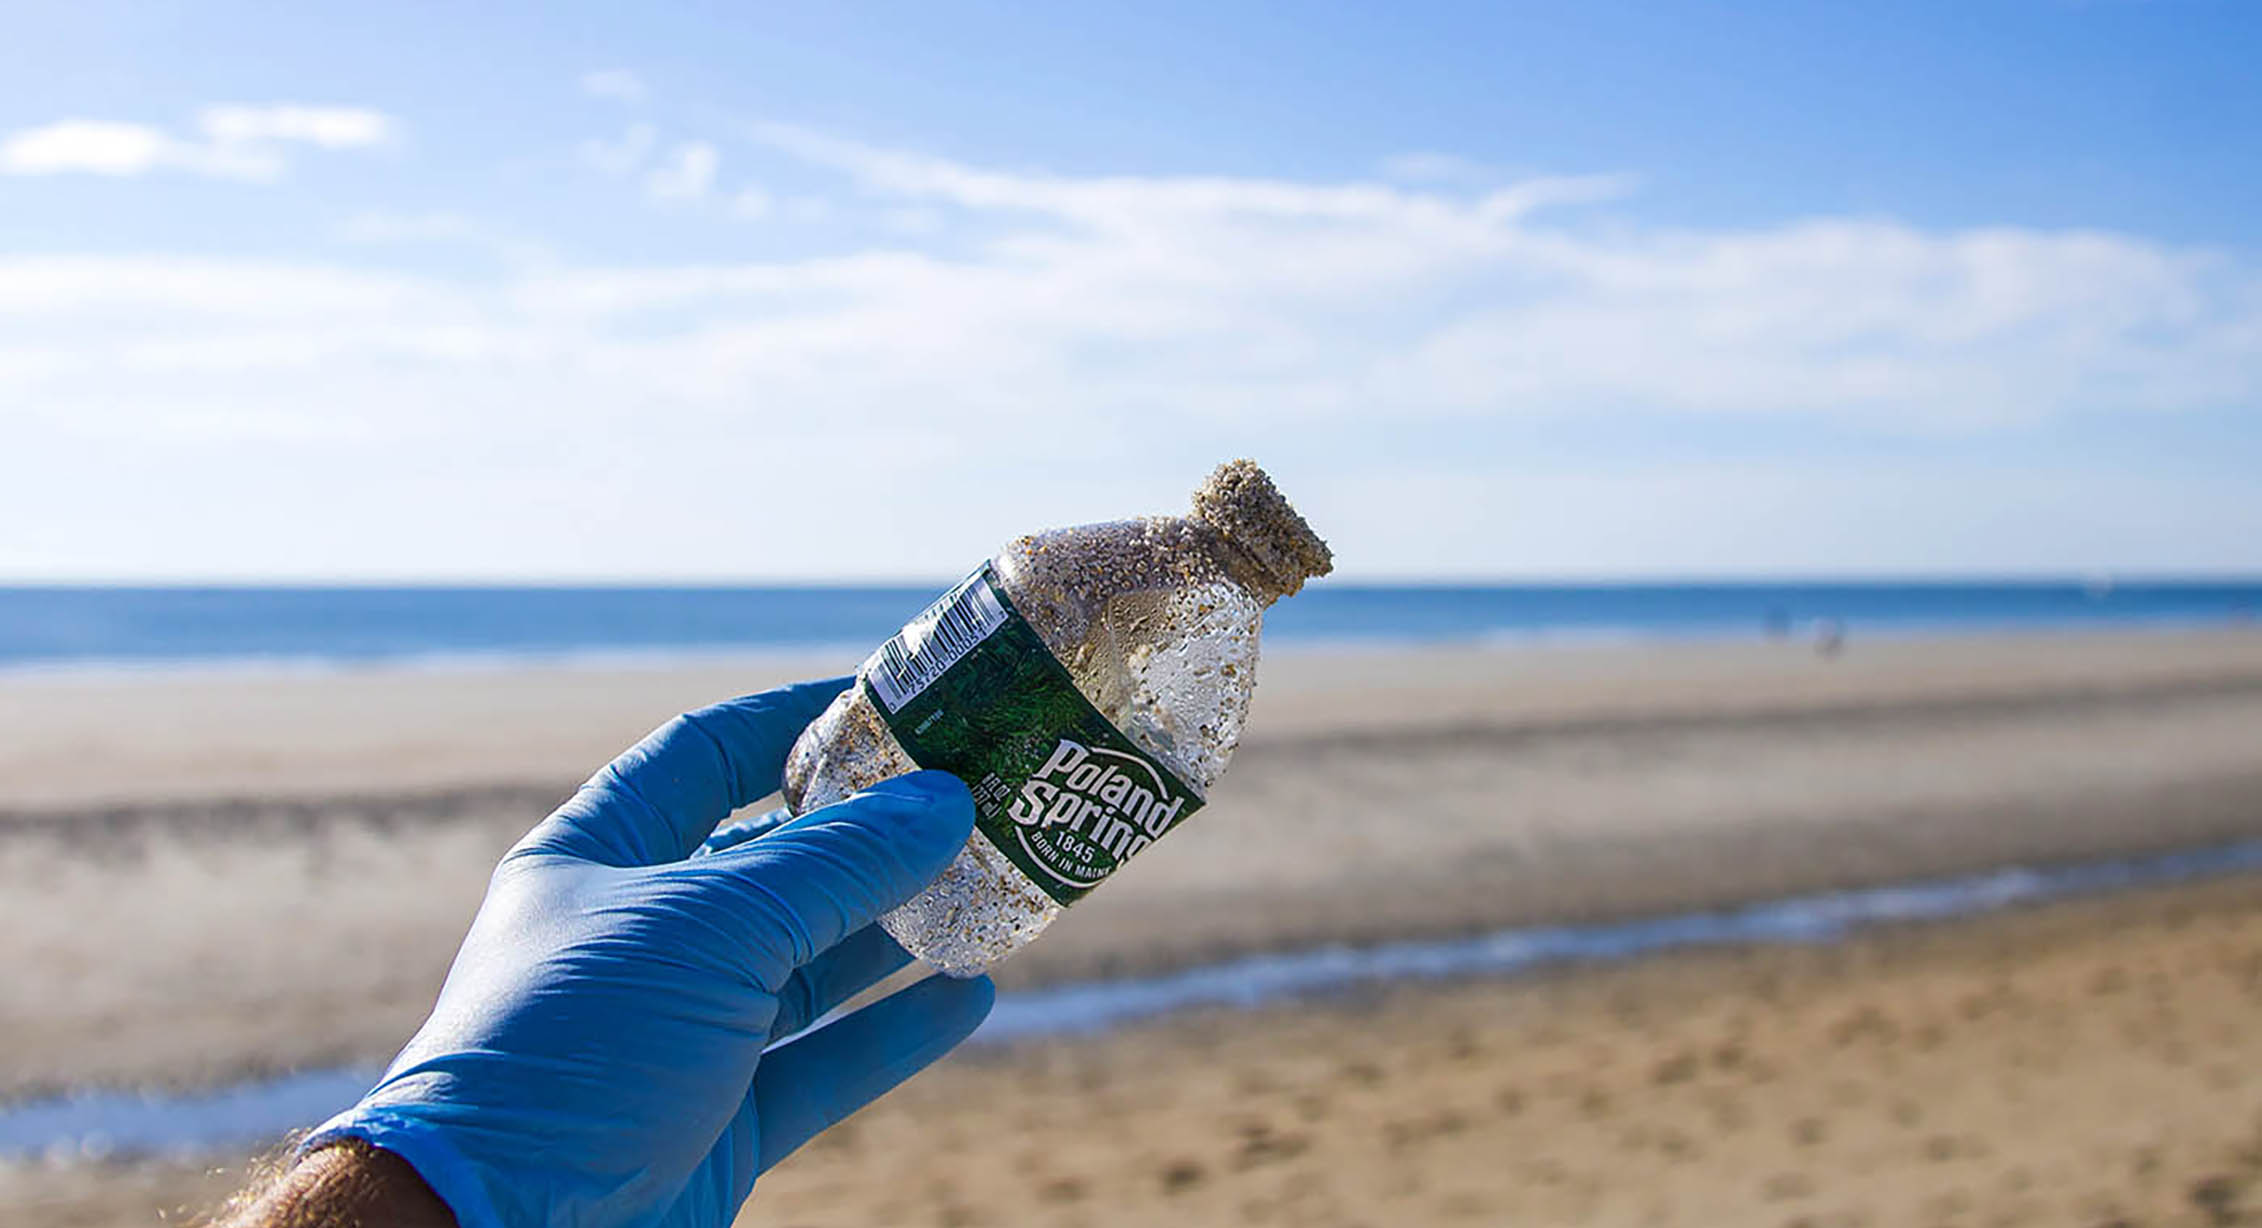 A plastic bottle picked up on a beach